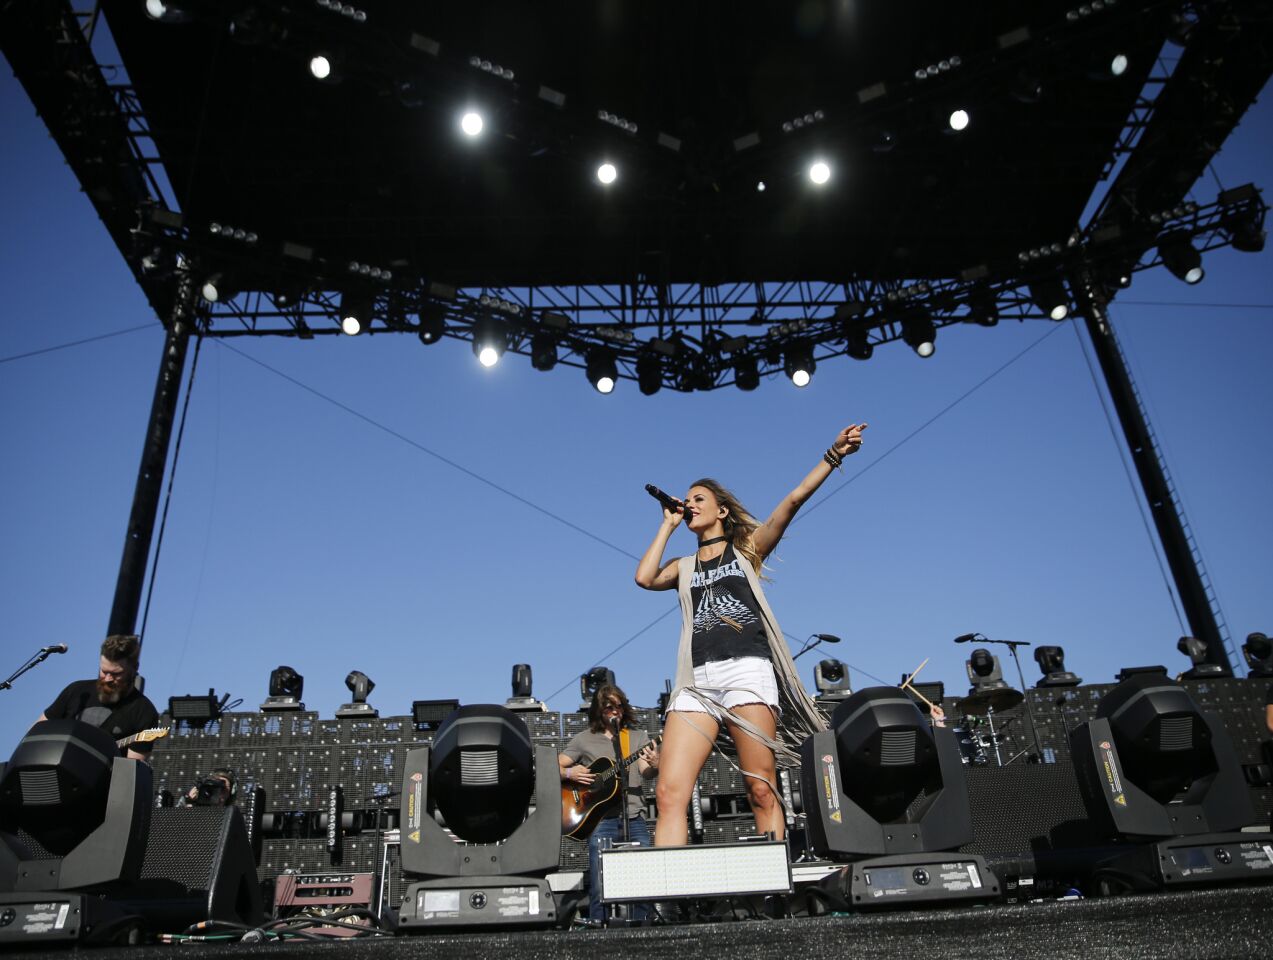 Jana Kramer performs on the Mane stage during the first day of the 10th anniversary of Stagecoach Country Music Festival at the Empire Polo Club in Indio on April 29, 2016.